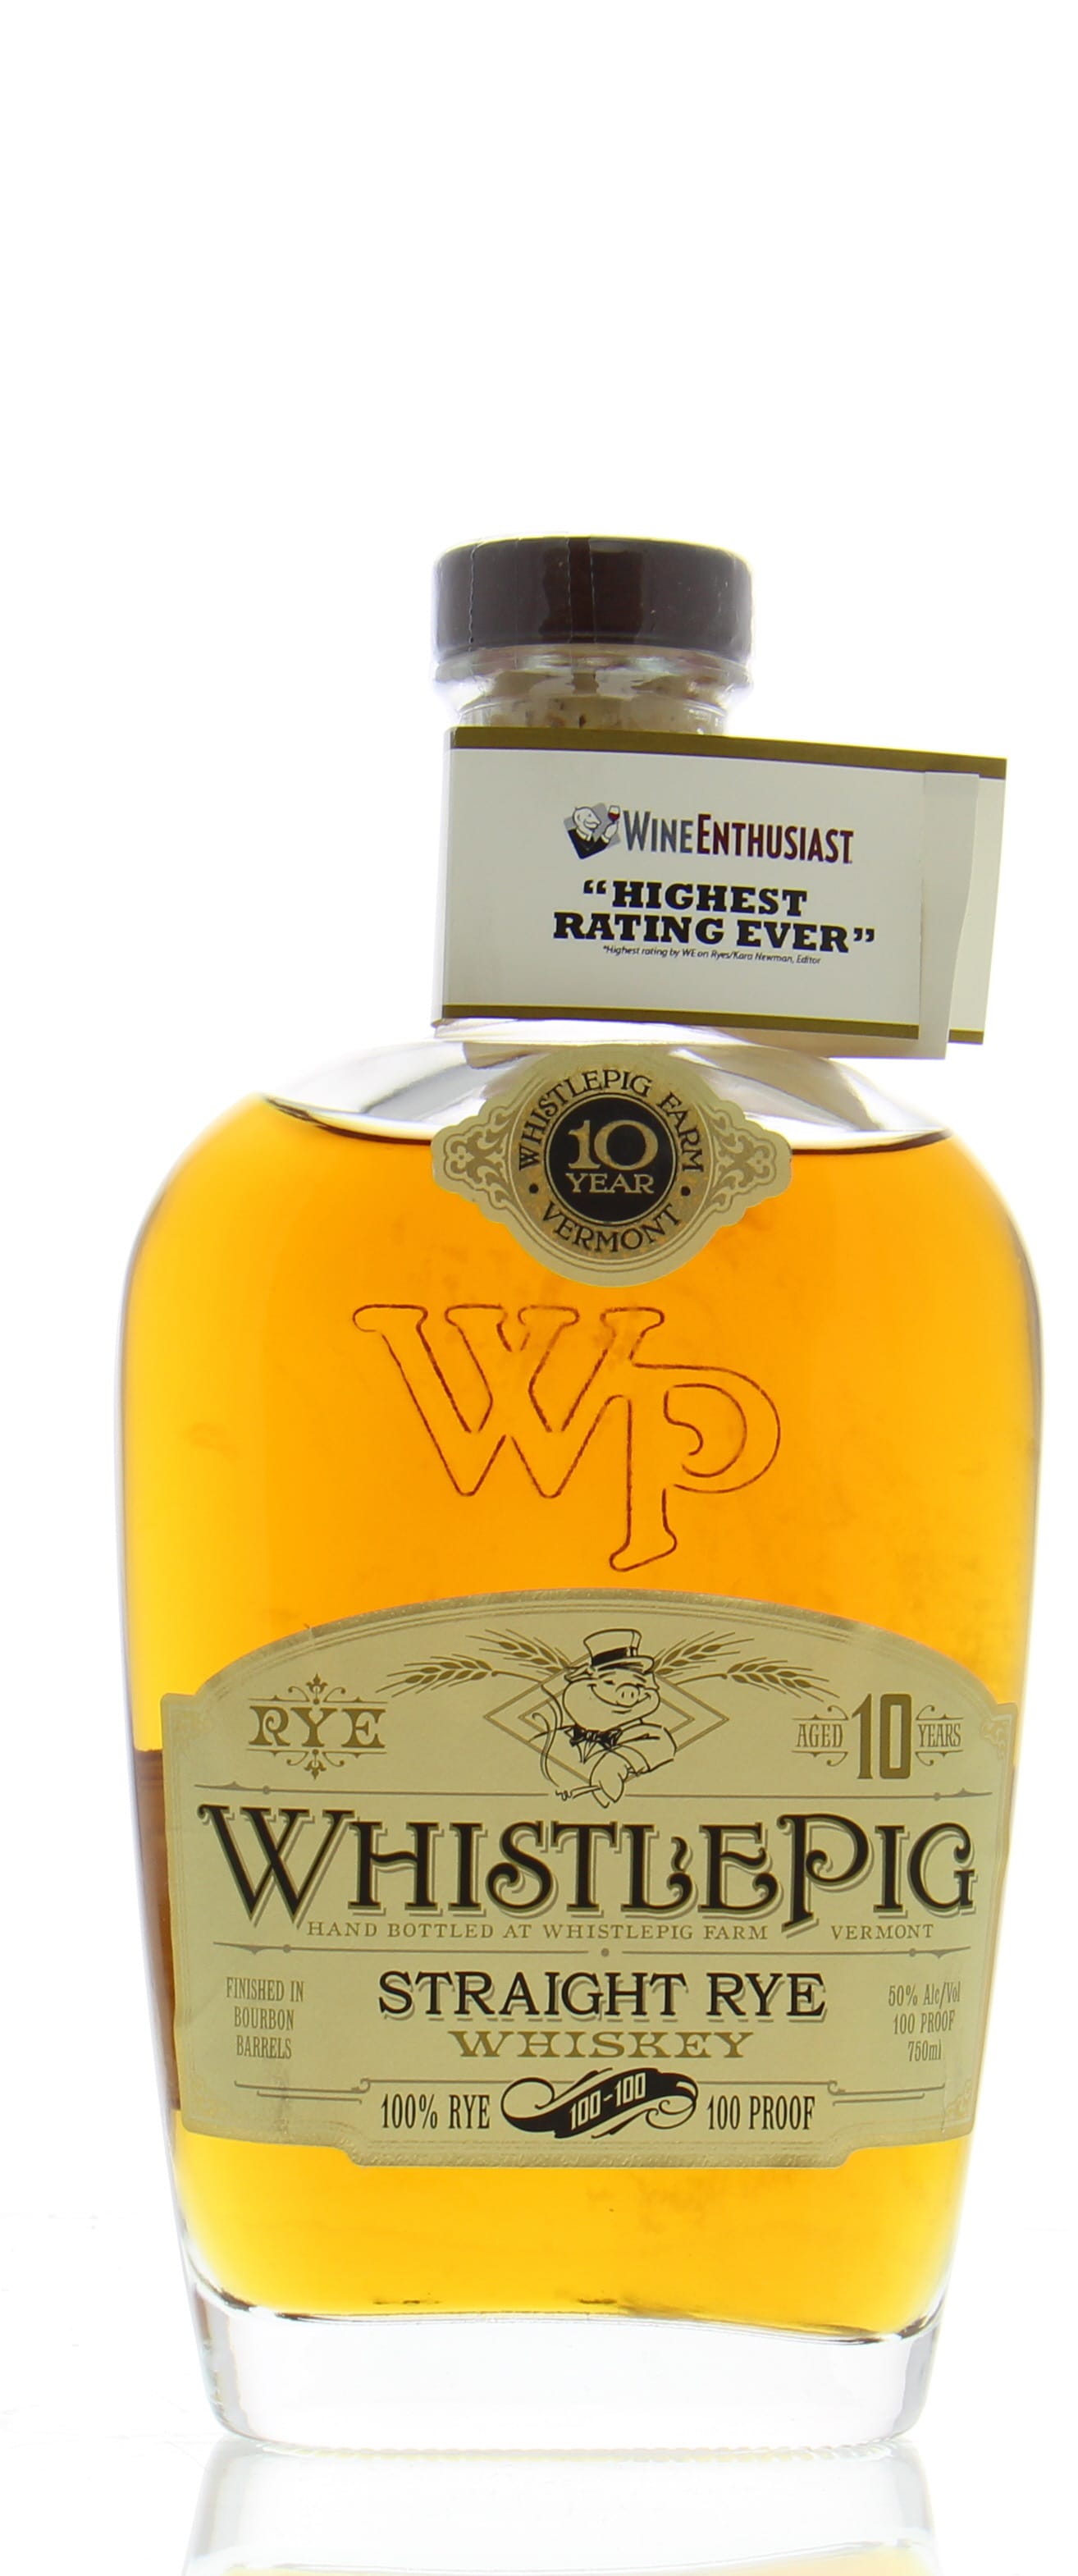 Alberta Distillers Ltd. - WhistlePig 10 Years Old Straight Rye Whiskey 50% NV Perfect